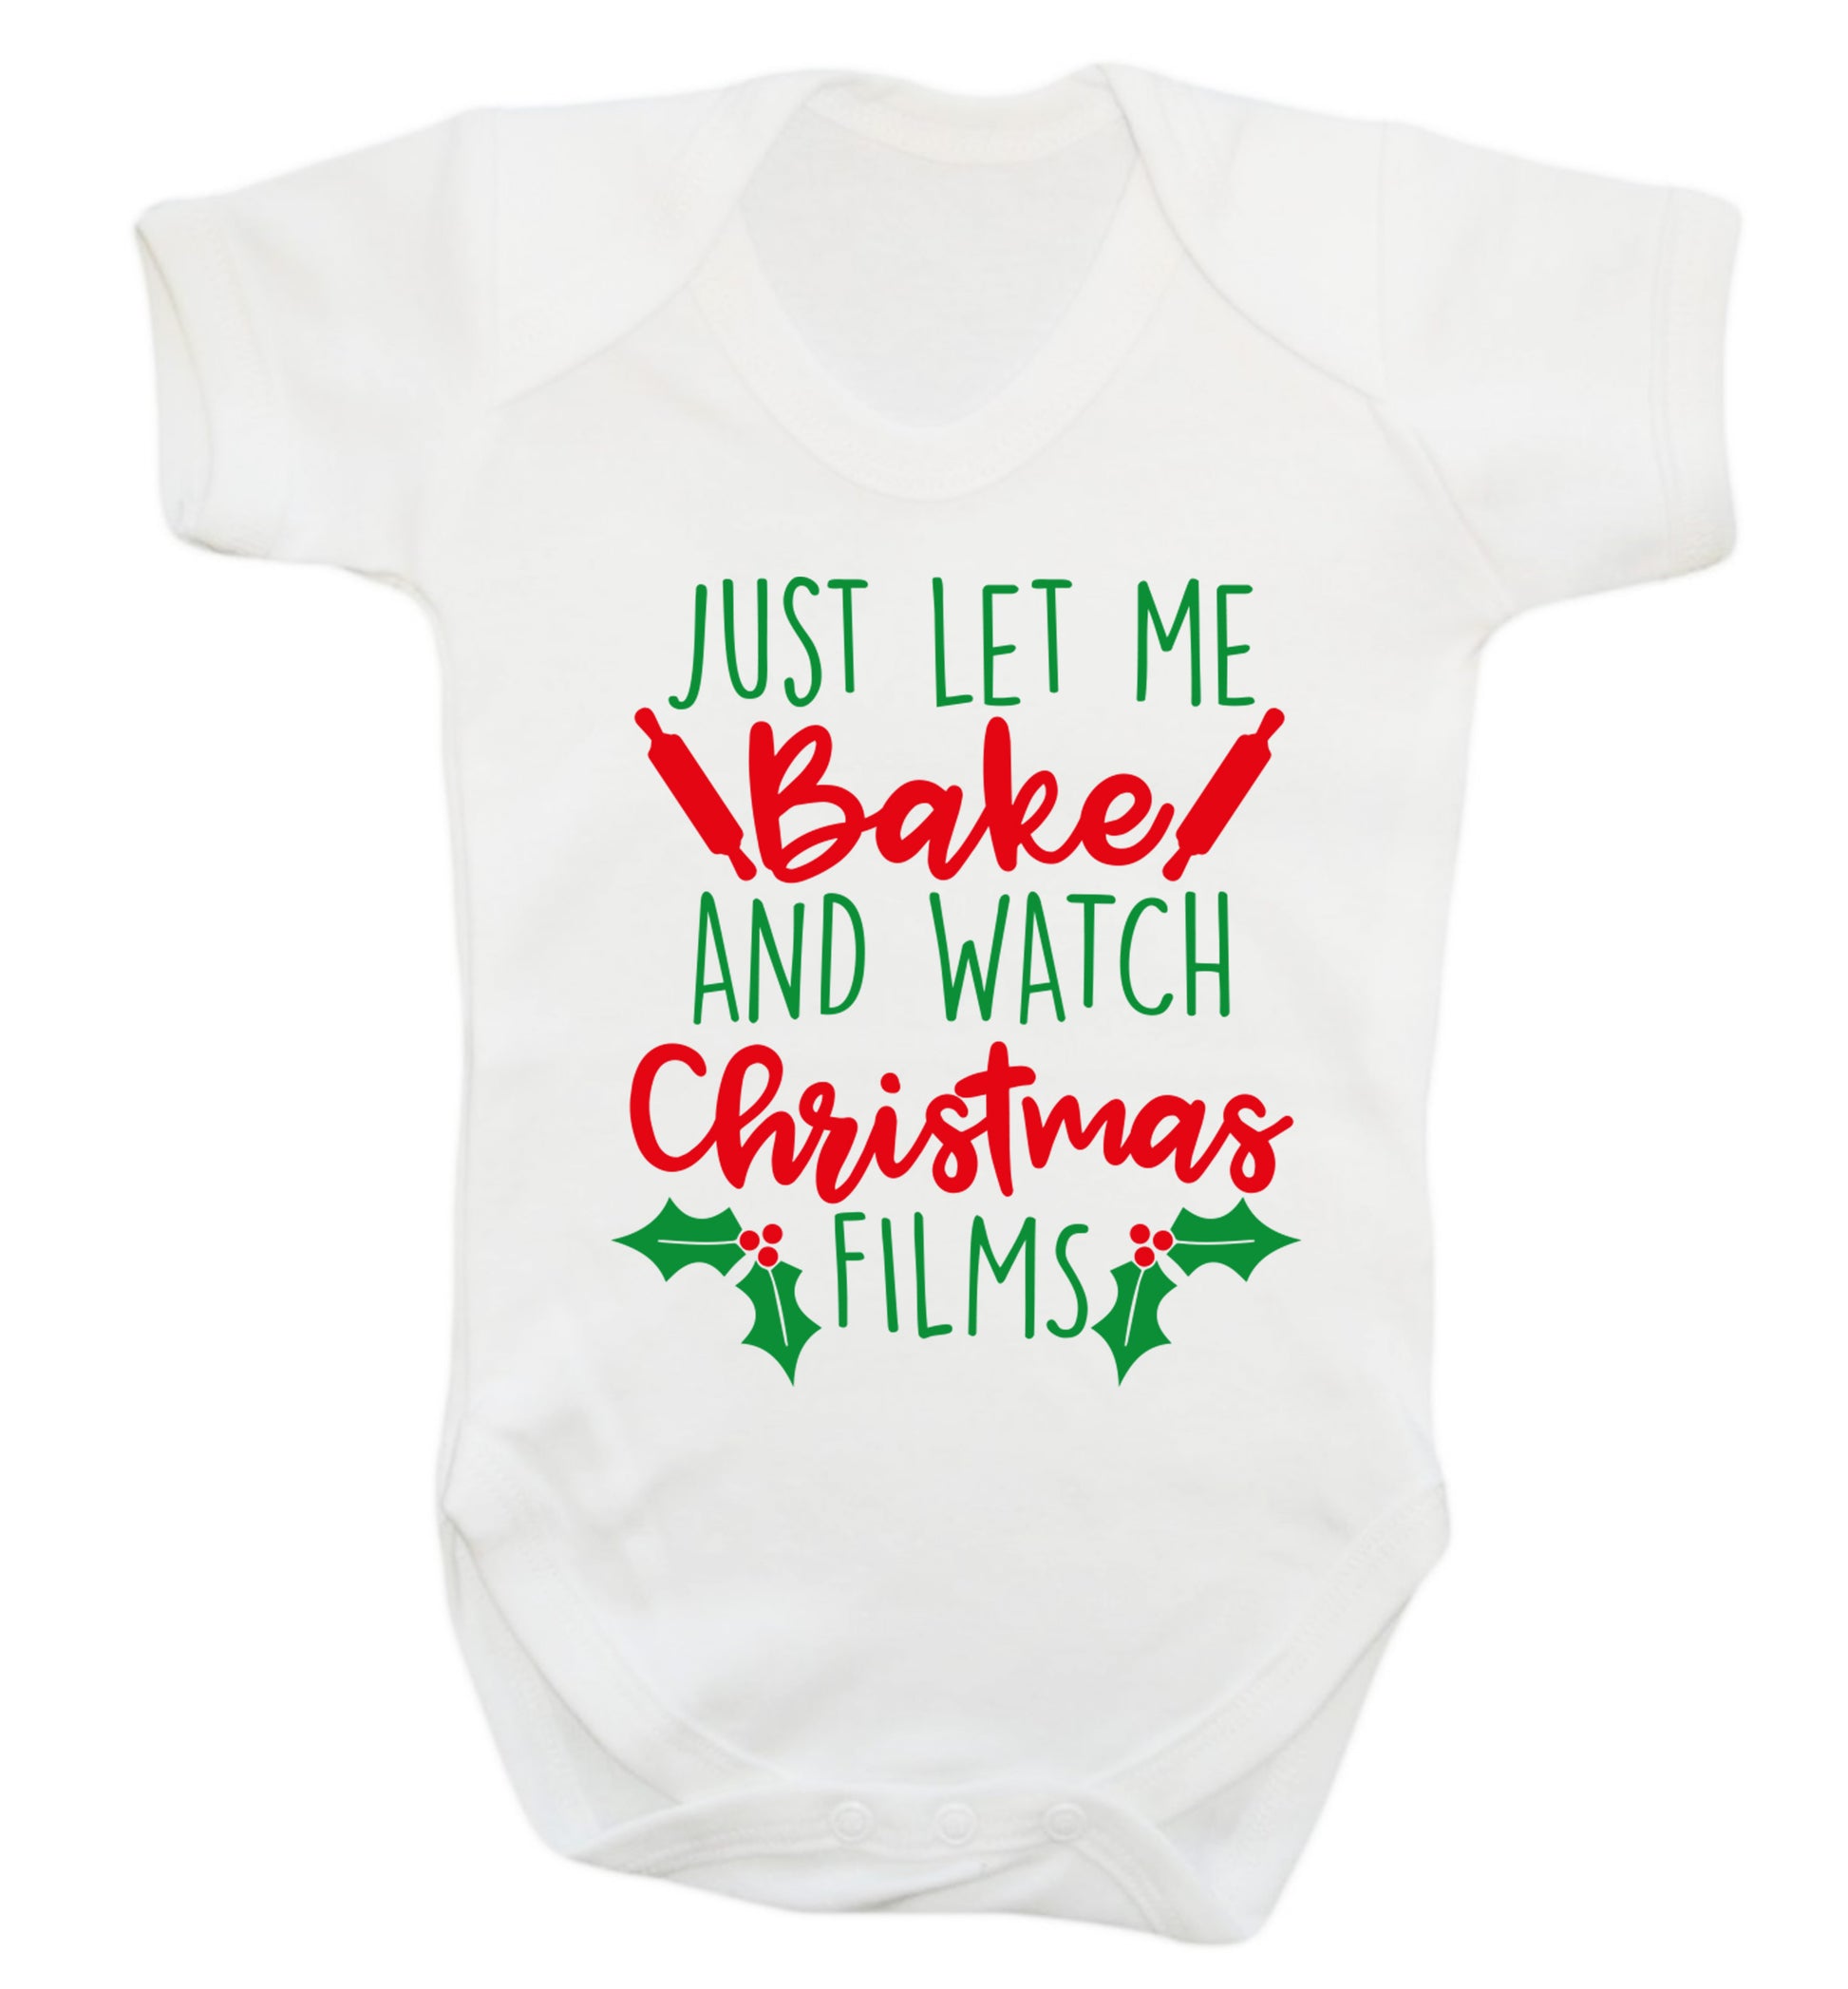 Just let me bake and watch Christmas films Baby Vest white 18-24 months